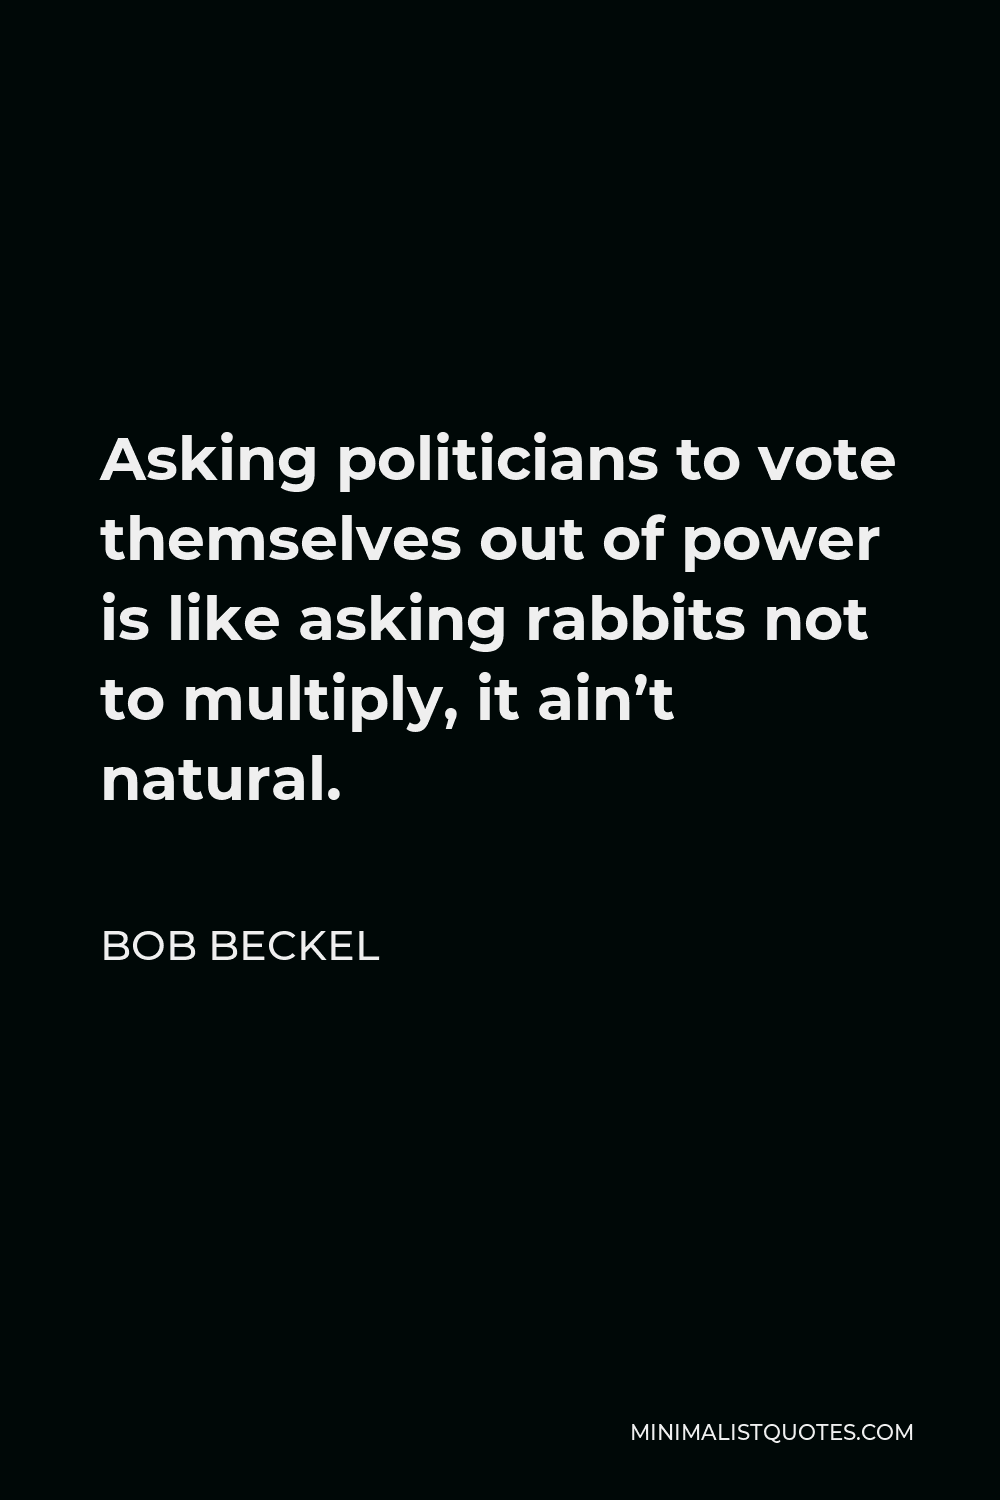 Bob Beckel Quote - Asking politicians to vote themselves out of power is like asking rabbits not to multiply, it ain’t natural.